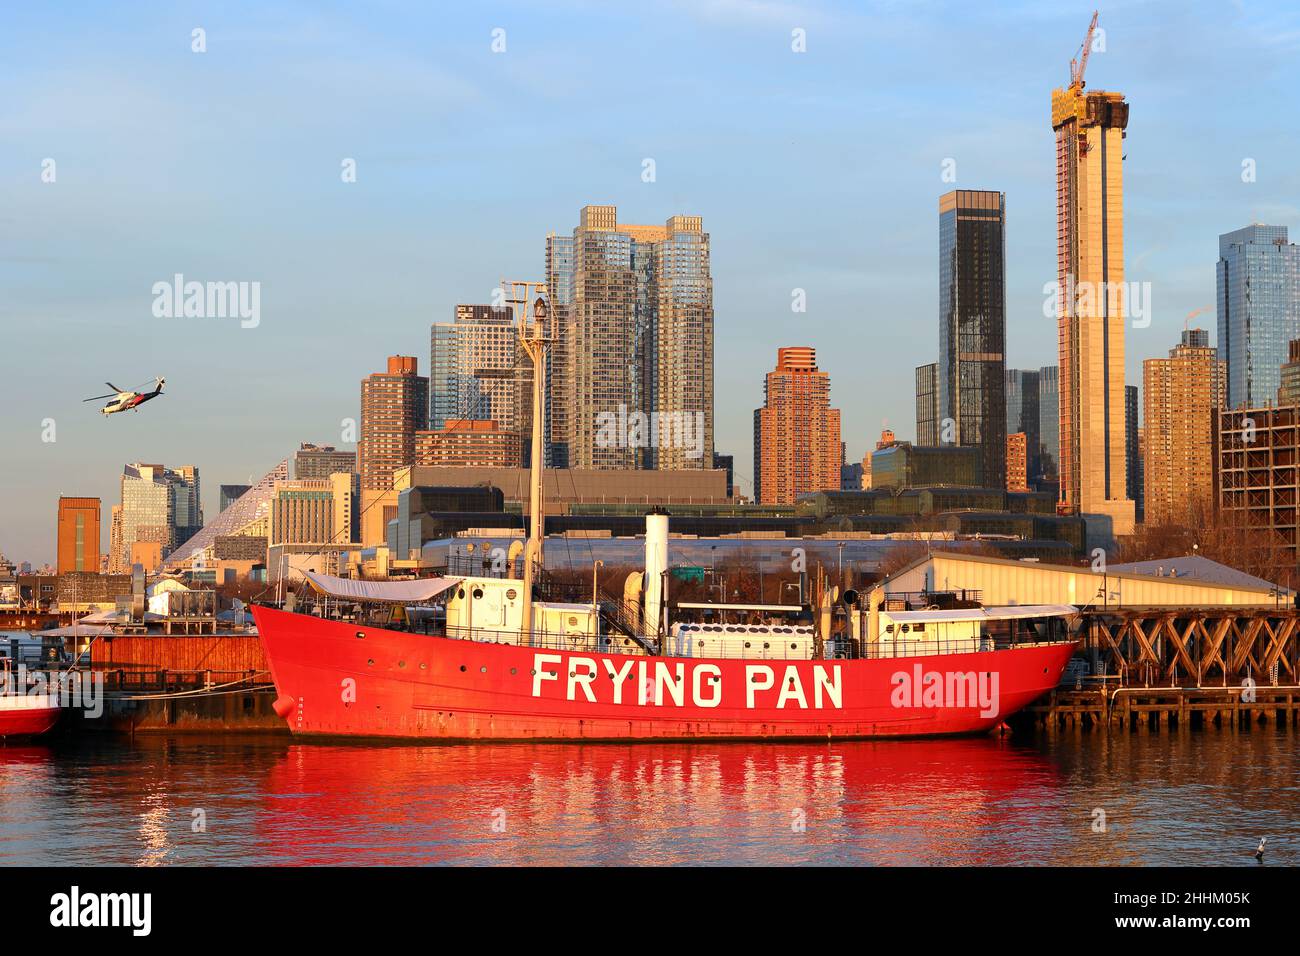 The Frying Pan lightship at Pier 66, Hudson River Park, New York. a historic ship at golden hour with the midtown manhattan skyline in the background. Stock Photo